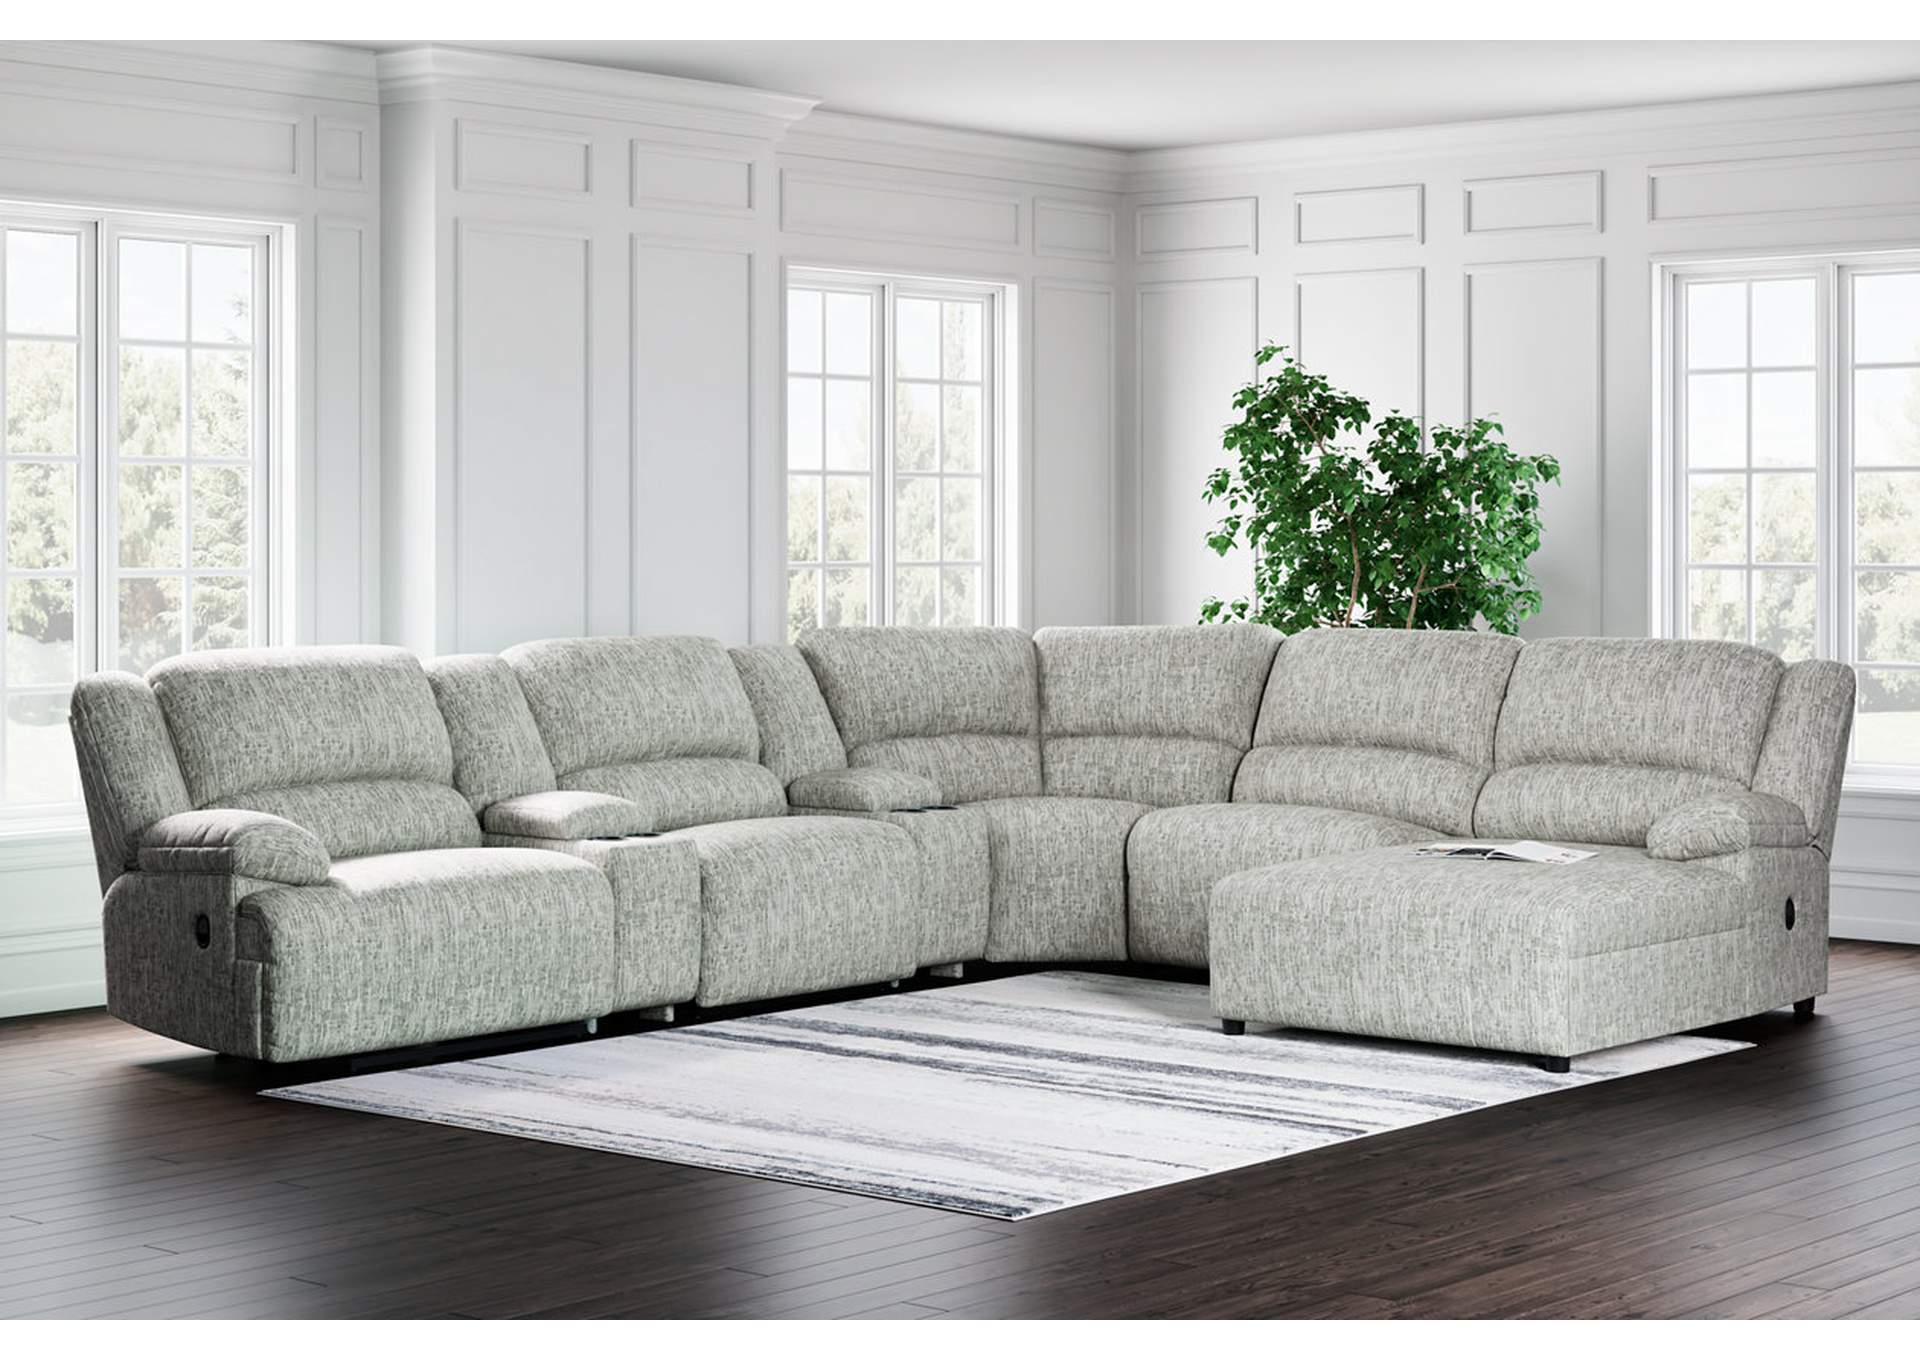 Mcclelland 7 Piece Reclining Sectional